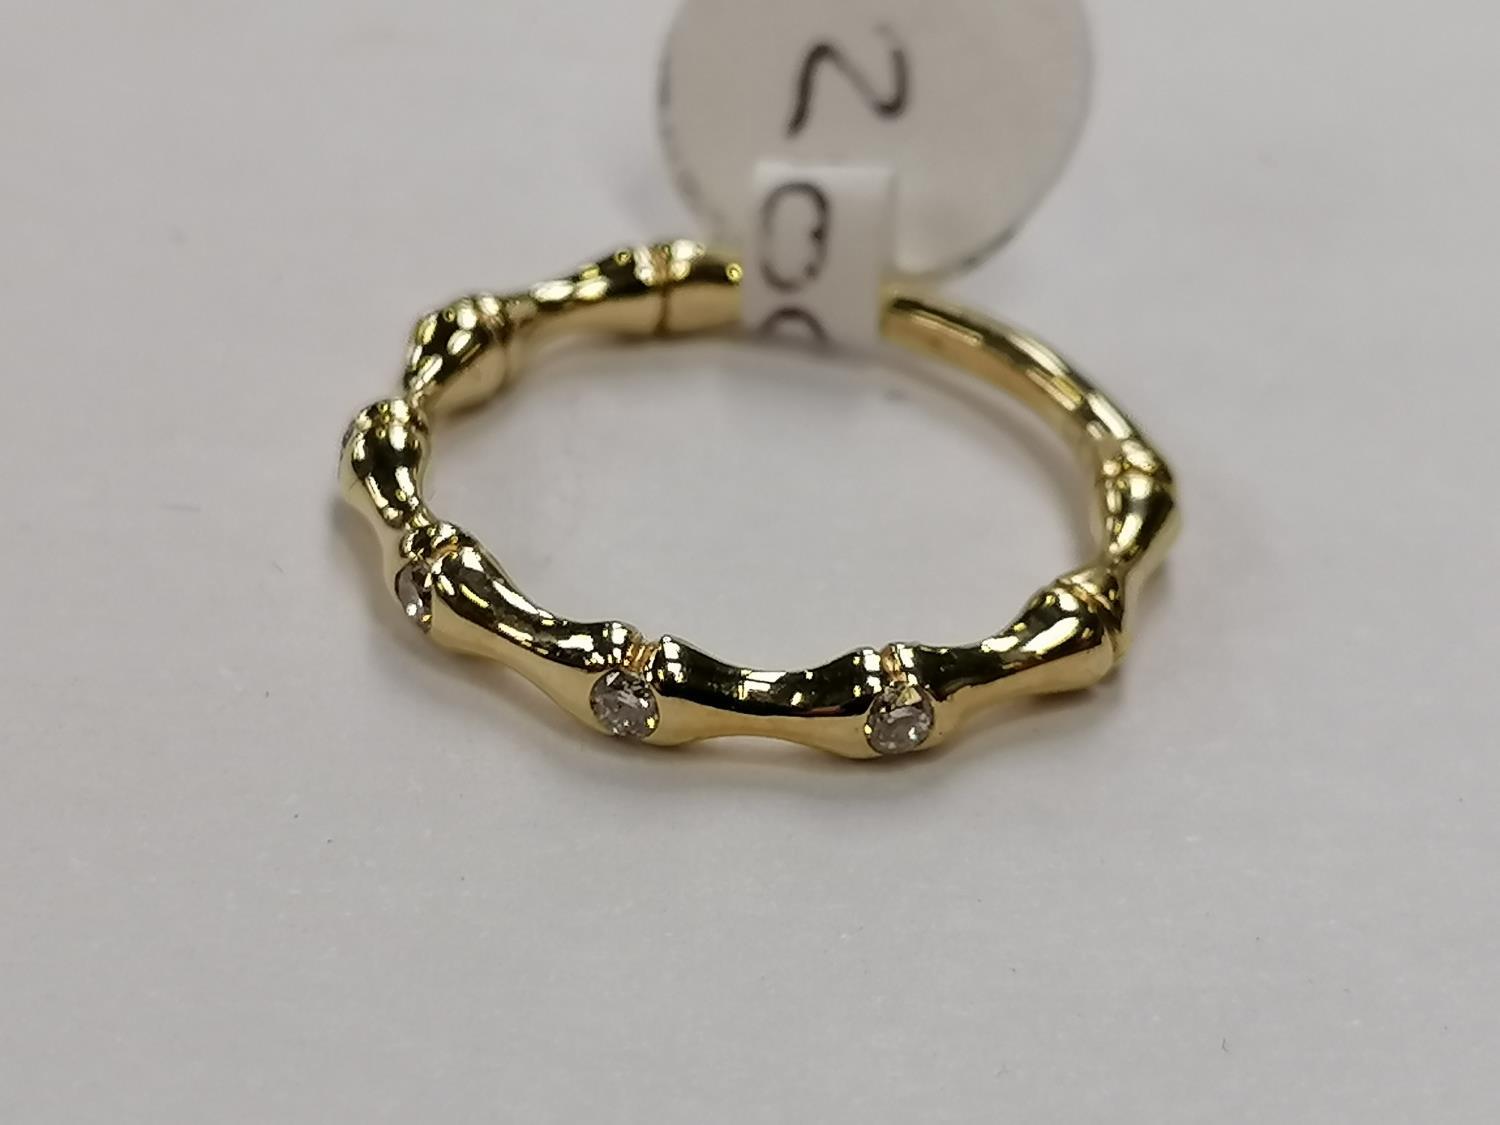 A 9CT YELLOW GOLD DIAMOND HALF ETERNITY RING, WEIGHT 2.2 GRAMS, INSURANCE VALUE £799.00